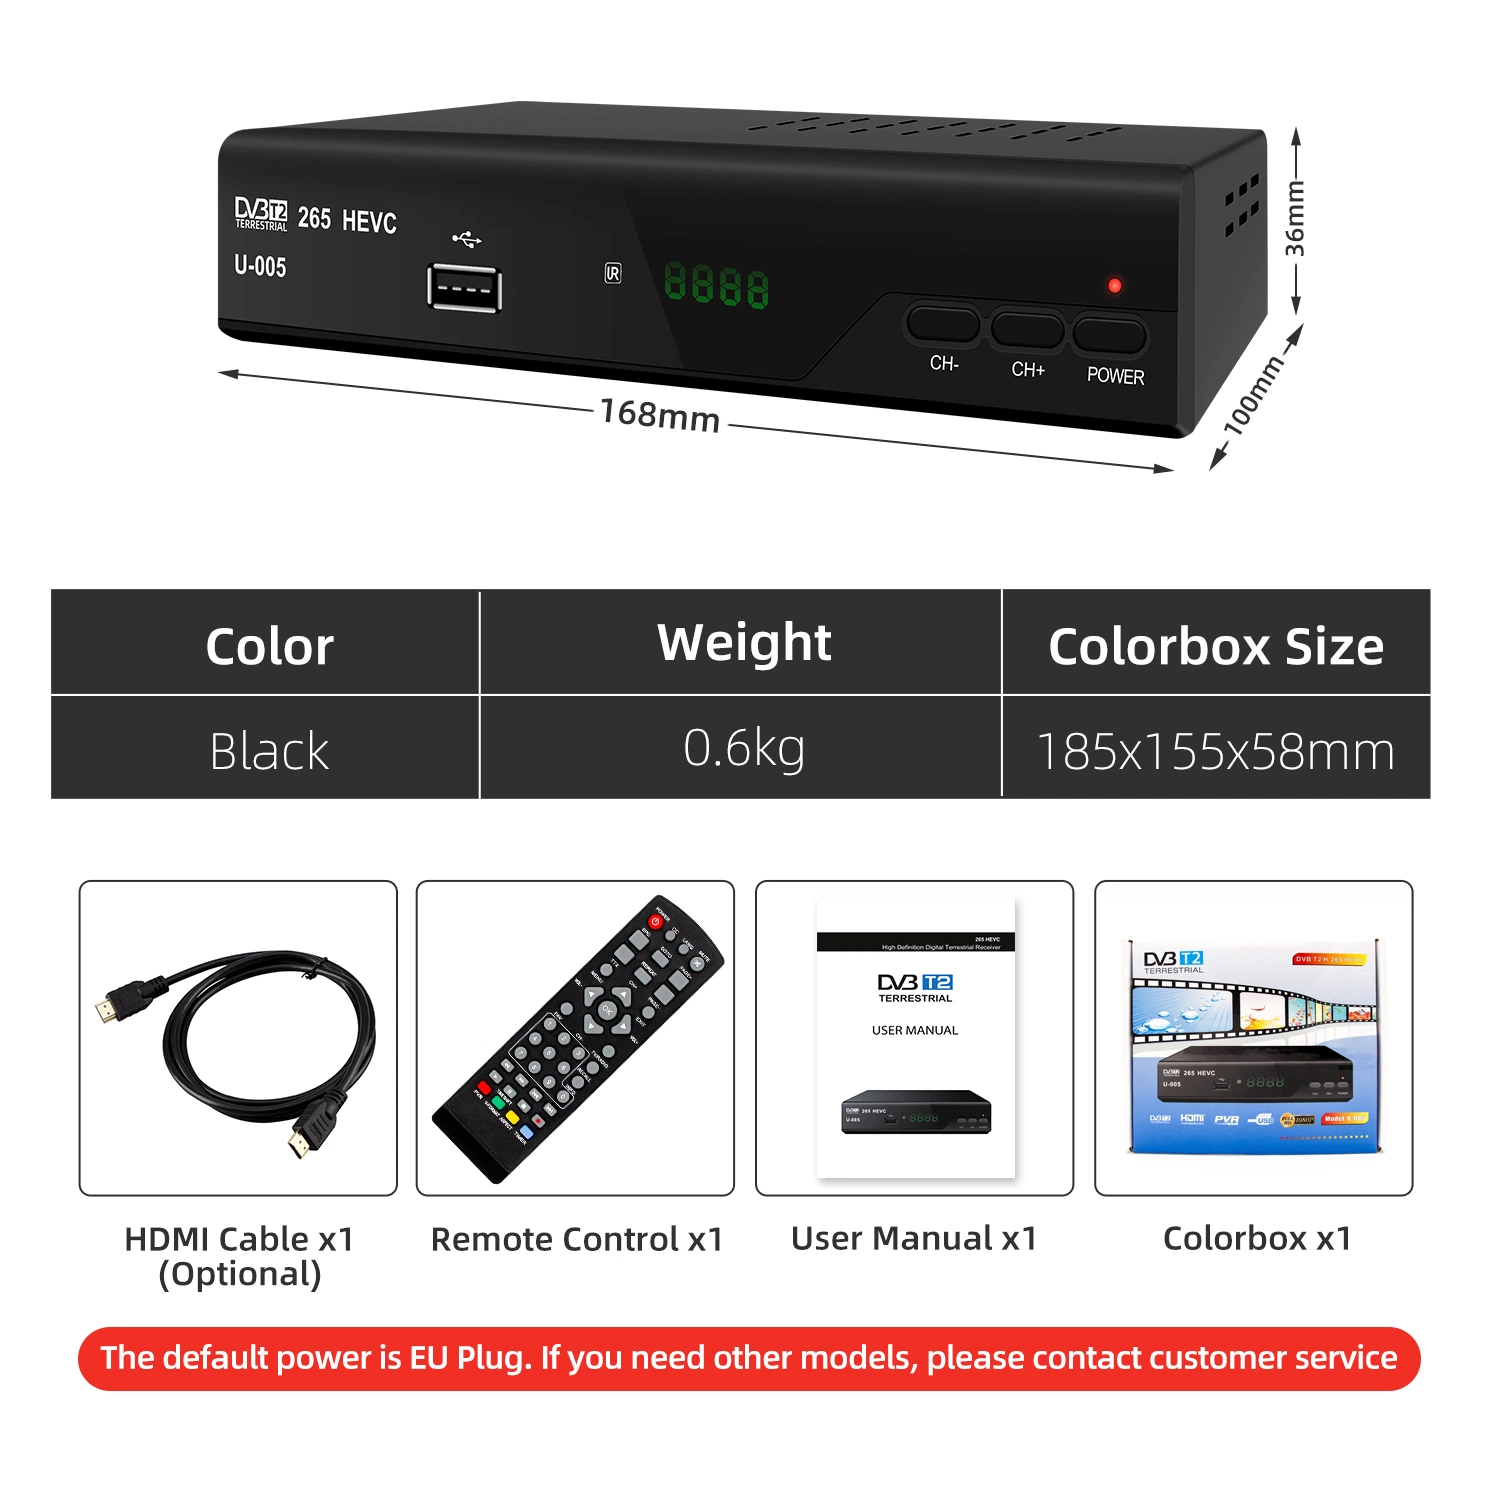 Hot Selling New Style OEM Compliant Set Top Box Hevc H. 265 TV Receiver DVB-T2